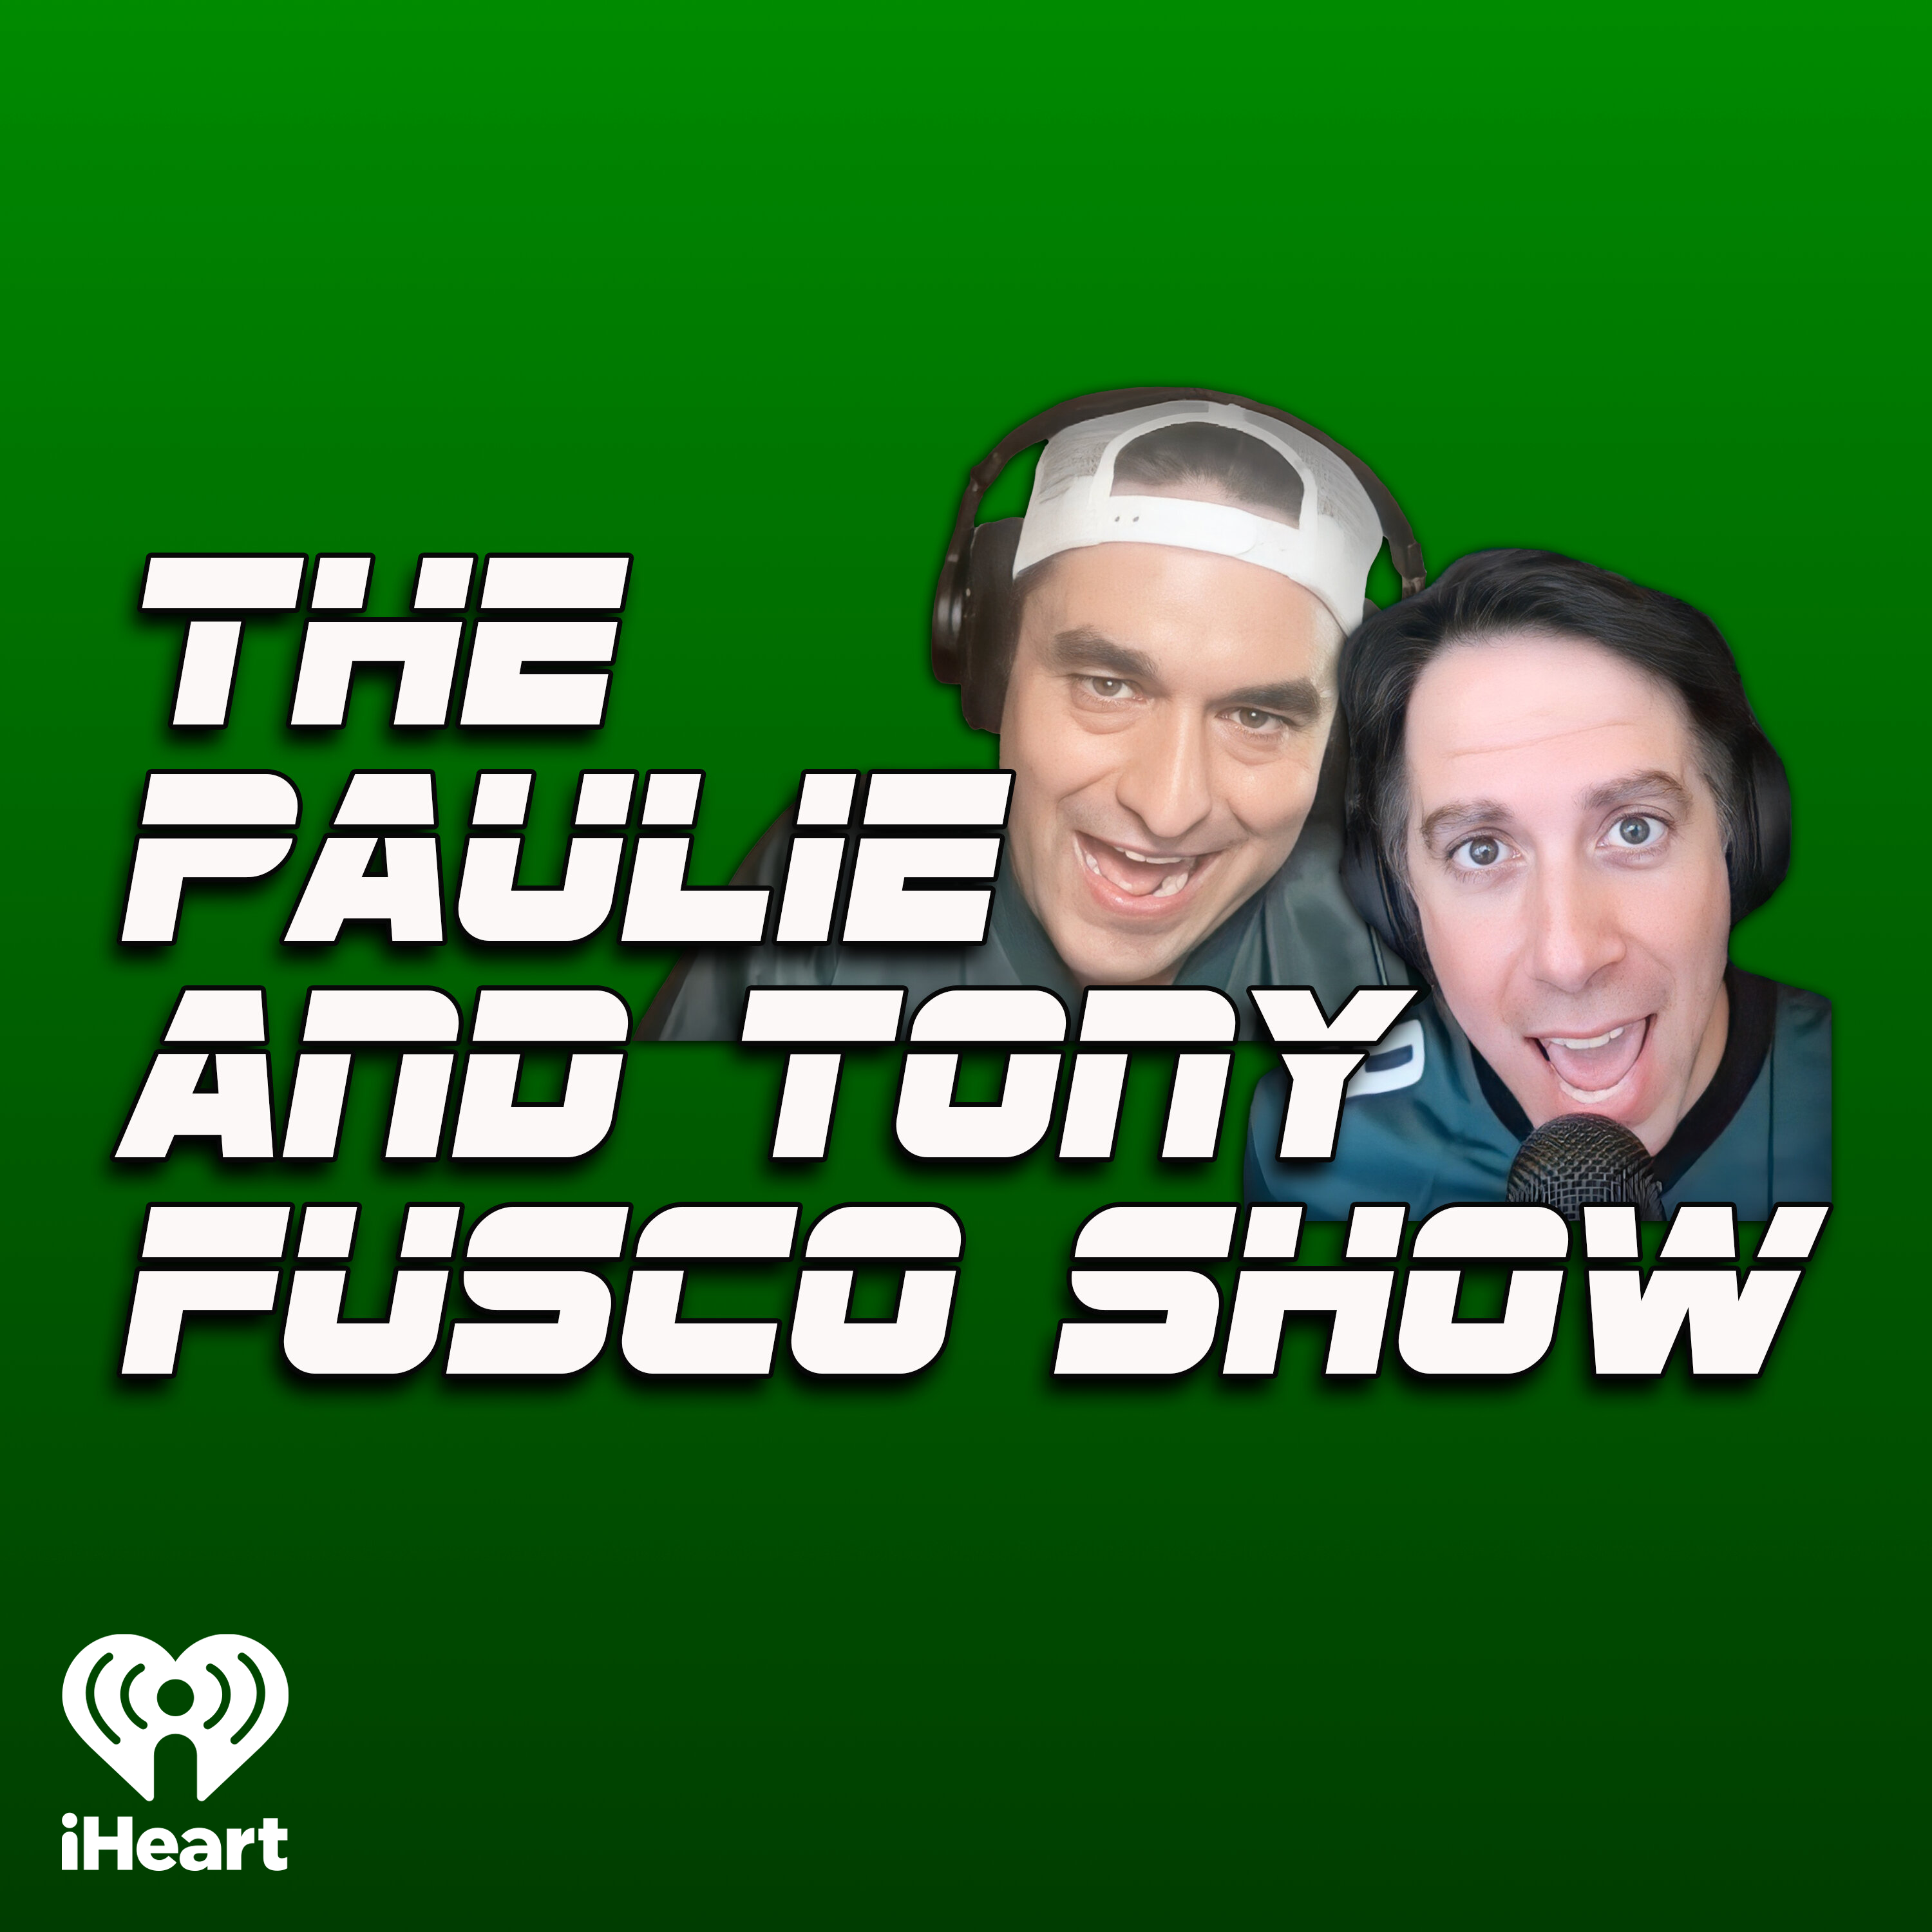 The Paulie & Tony Fusco Show: Sixers broadcaster Marc Zumoff GETS KICKED OFF + why robot umps are DANGEROUS